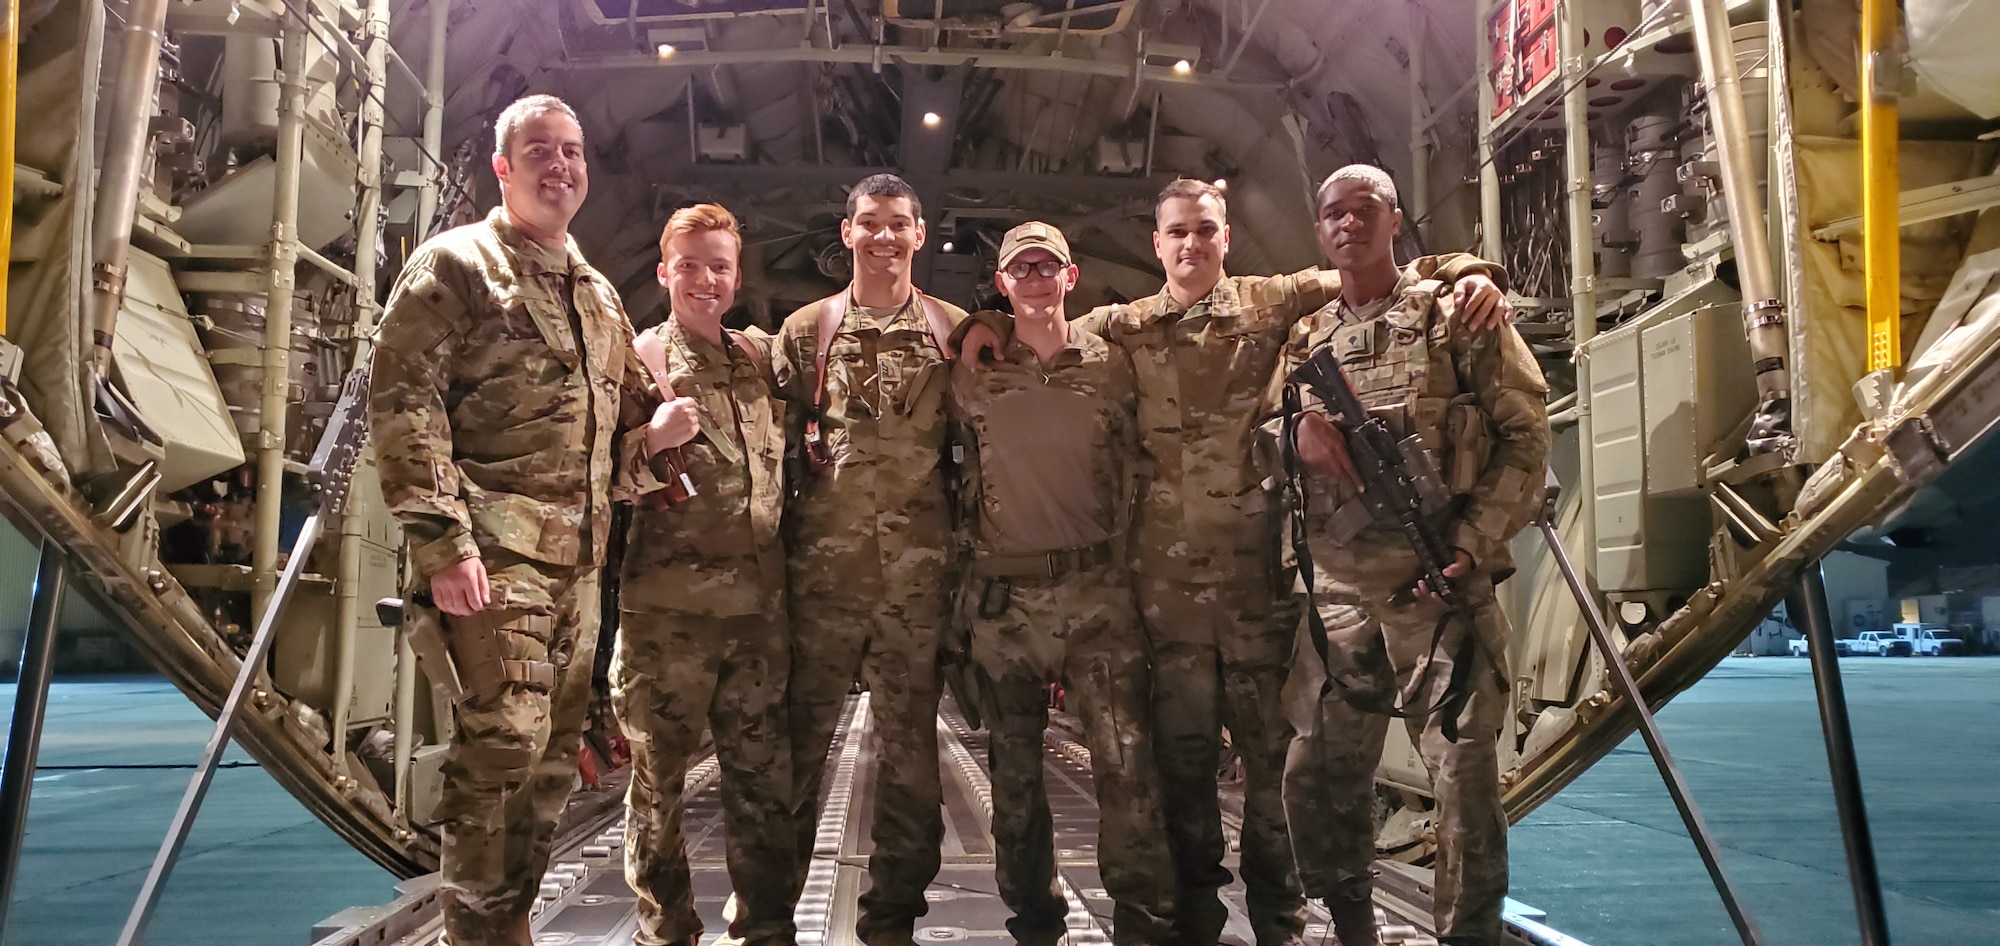 An aircrew assigned to the 774th Expeditionary Airlift Squadron poses for a group photo in Afghanistan, Sept. 2019.